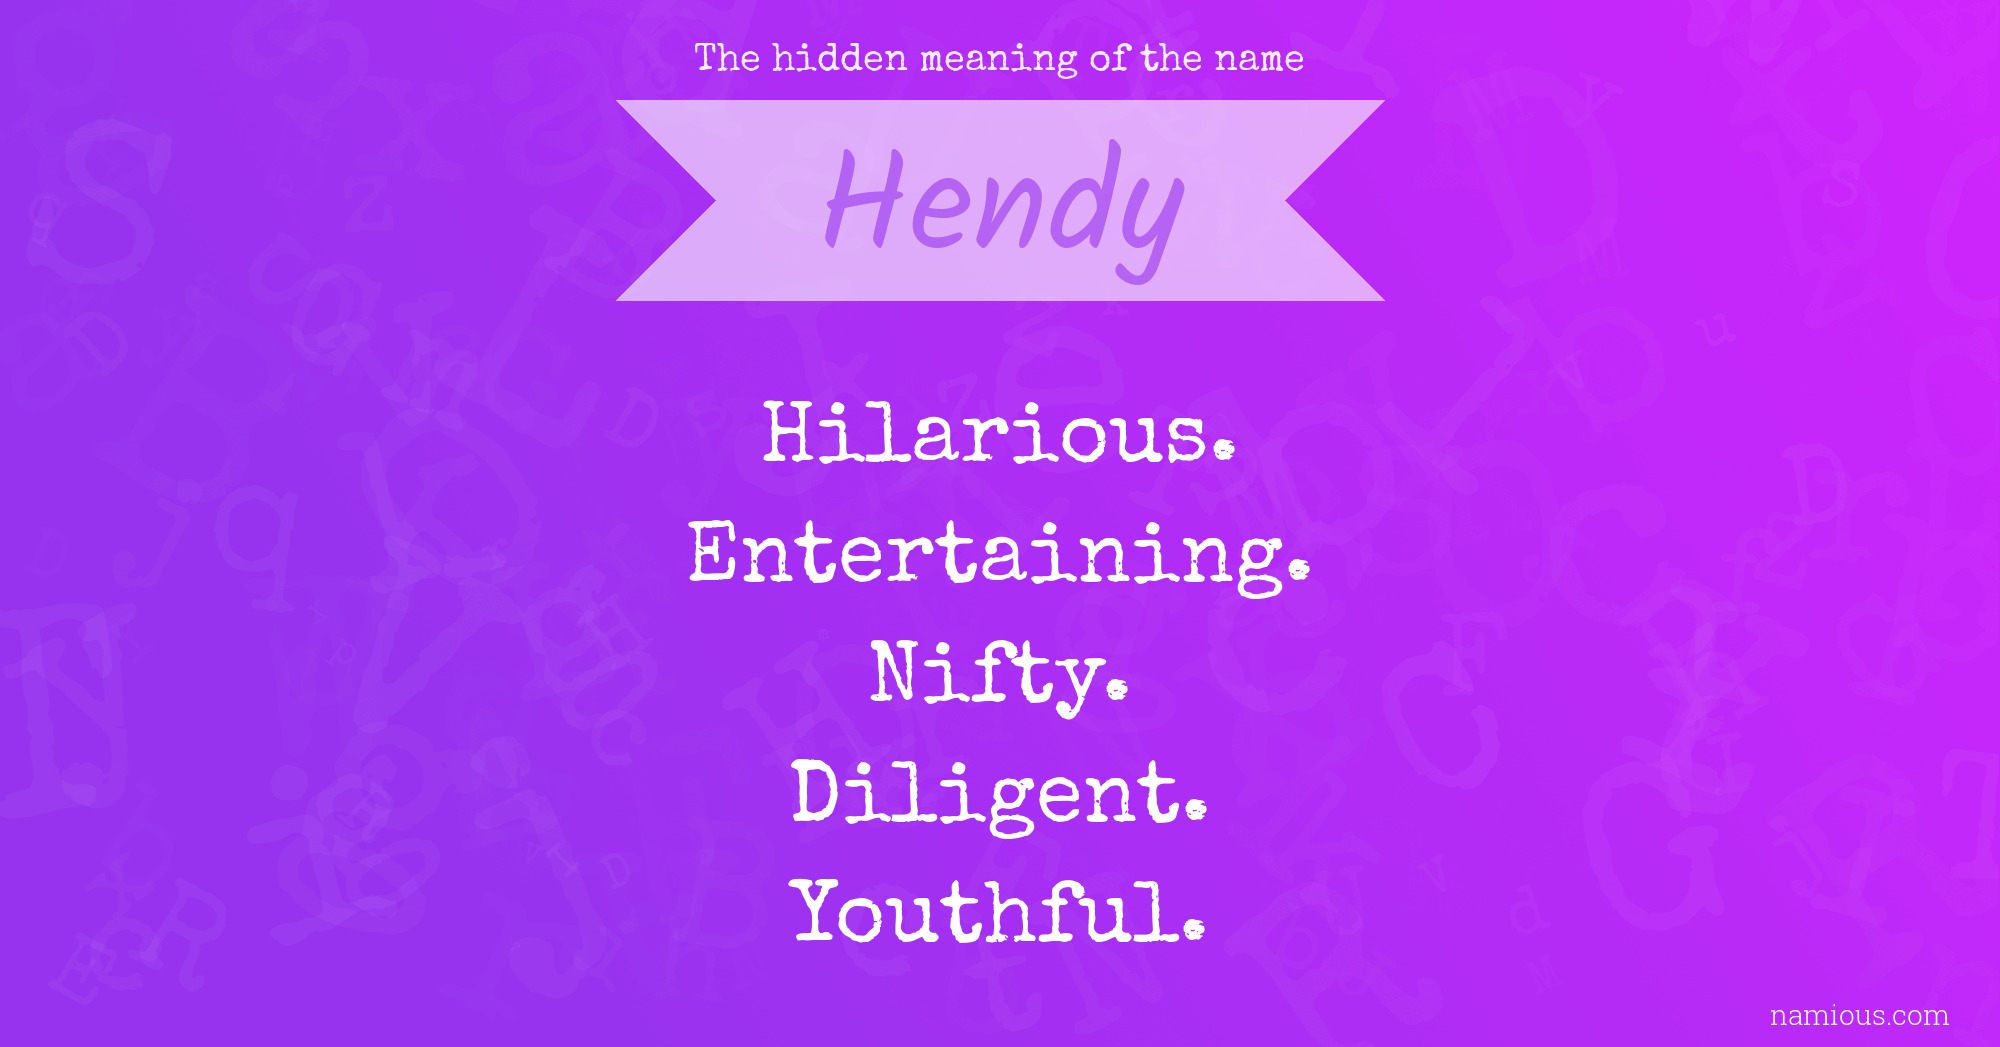 The hidden meaning of the name Hendy